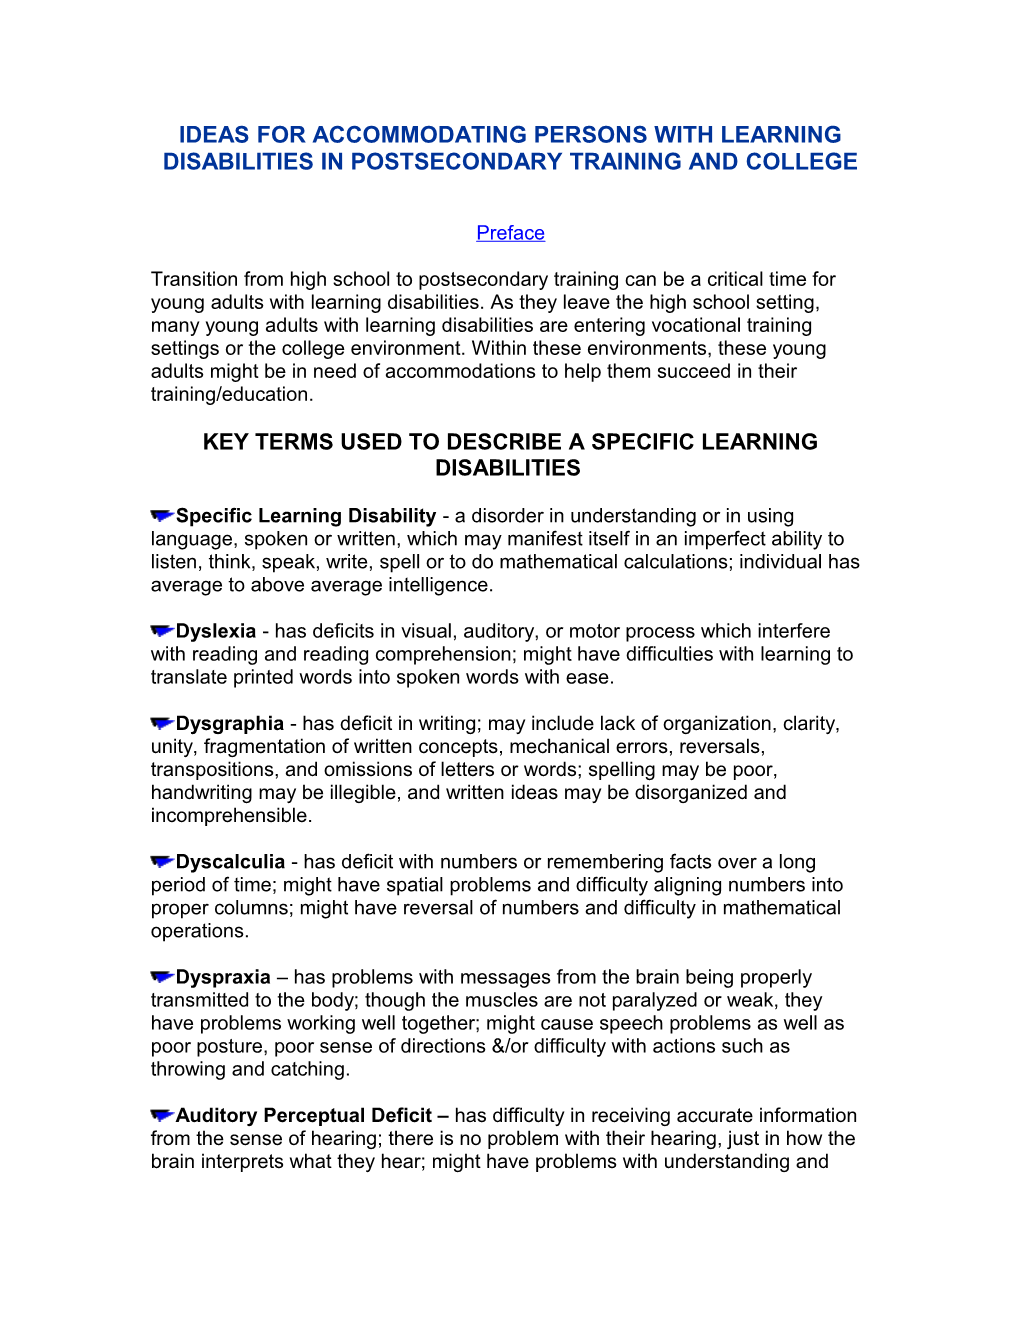 Ideas for Accommodating Persons with Learning Disabilities in Postsecondary Training and College